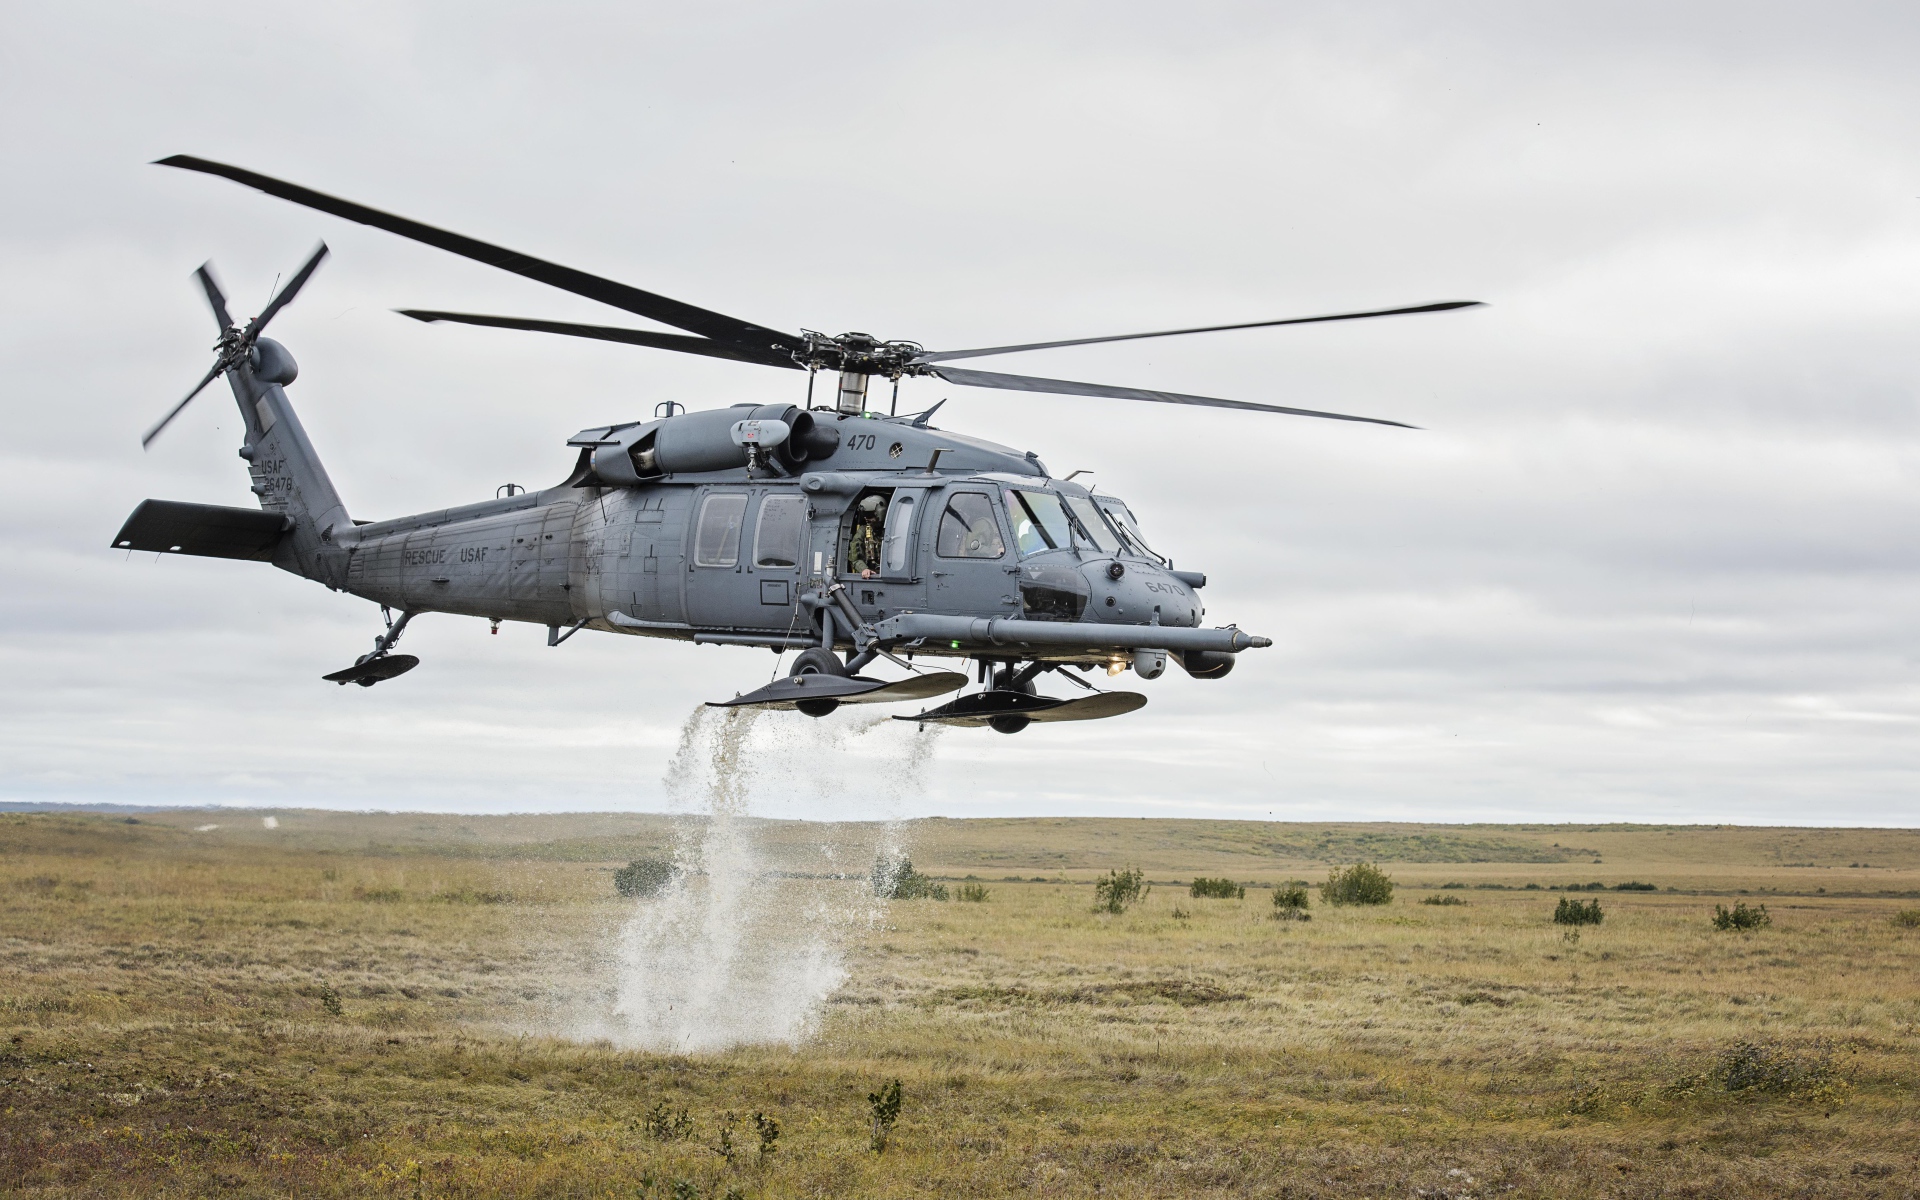 Sikorsky HH-60 Pave Hawk military helicopter with water